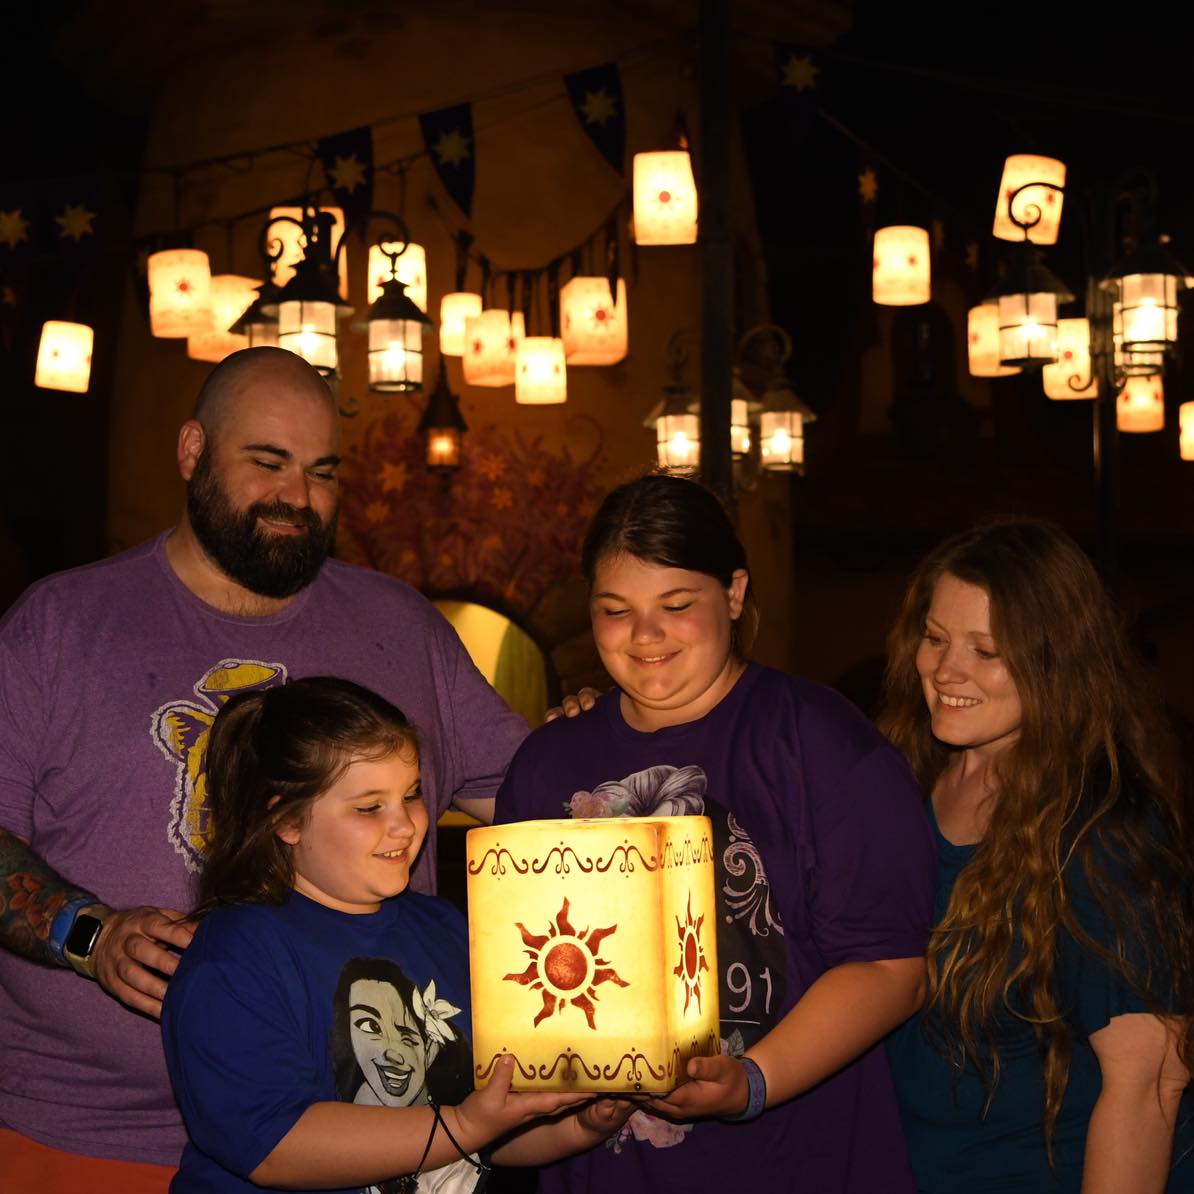 Family photo of Ms. G and family gathered around glowing lanterns at night